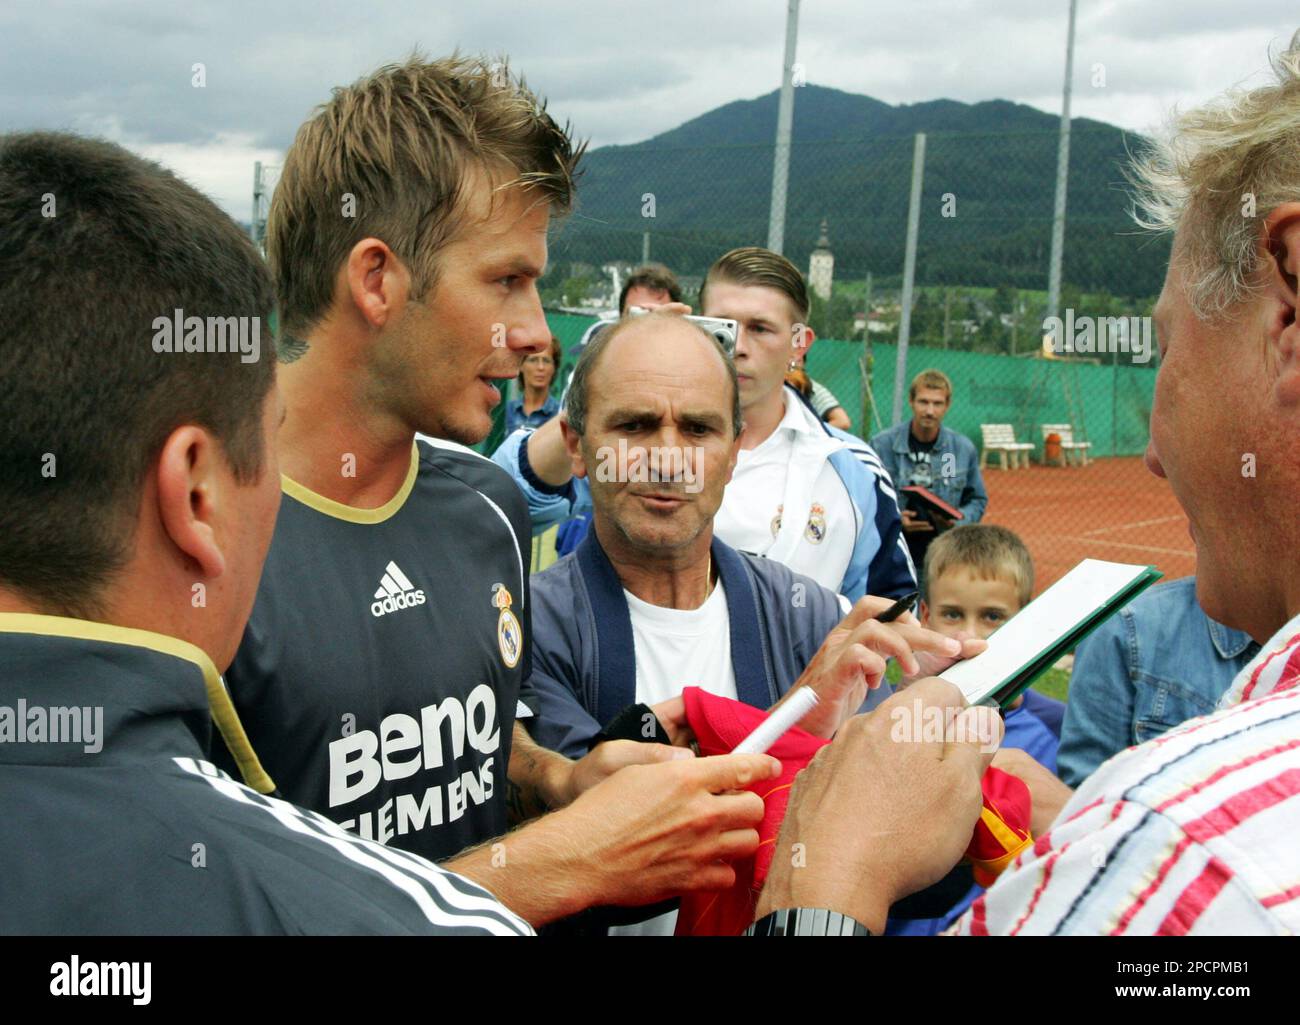 Real Madrid's David Beckham, left, signs autographs prior to a friendly soccer match between Real Madrid and the British soccer club Fulham, on Saturday, July 29, 2006, in Irdning, Austria. (AP Photo/Markus Leodolter) Stock Photo